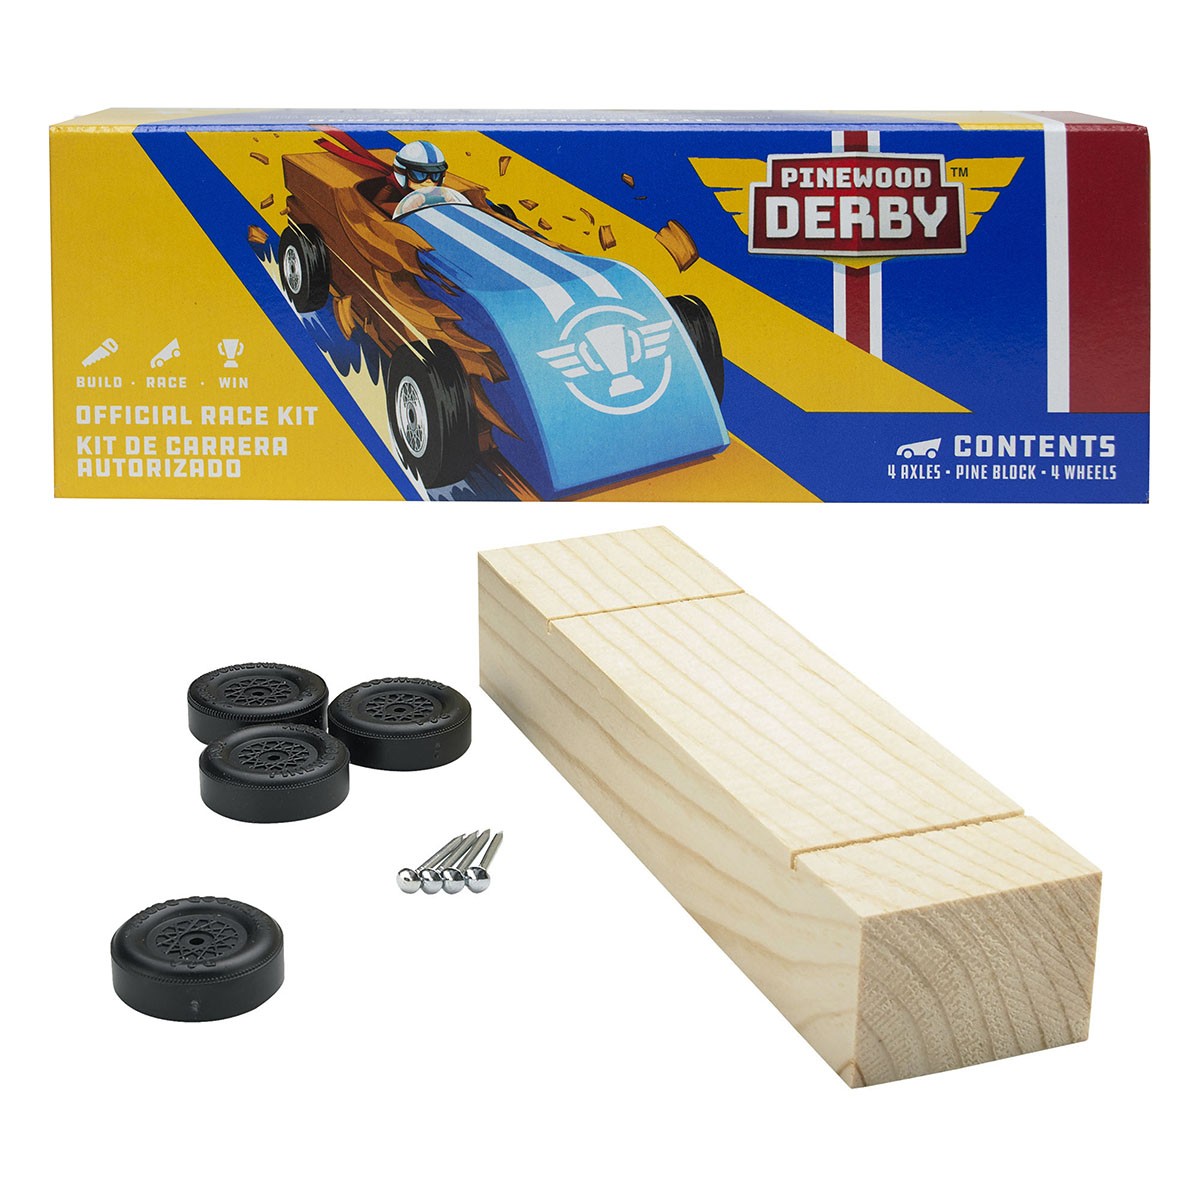 Accessory Kit 4 for Pinewood Derby Cars for sale online 